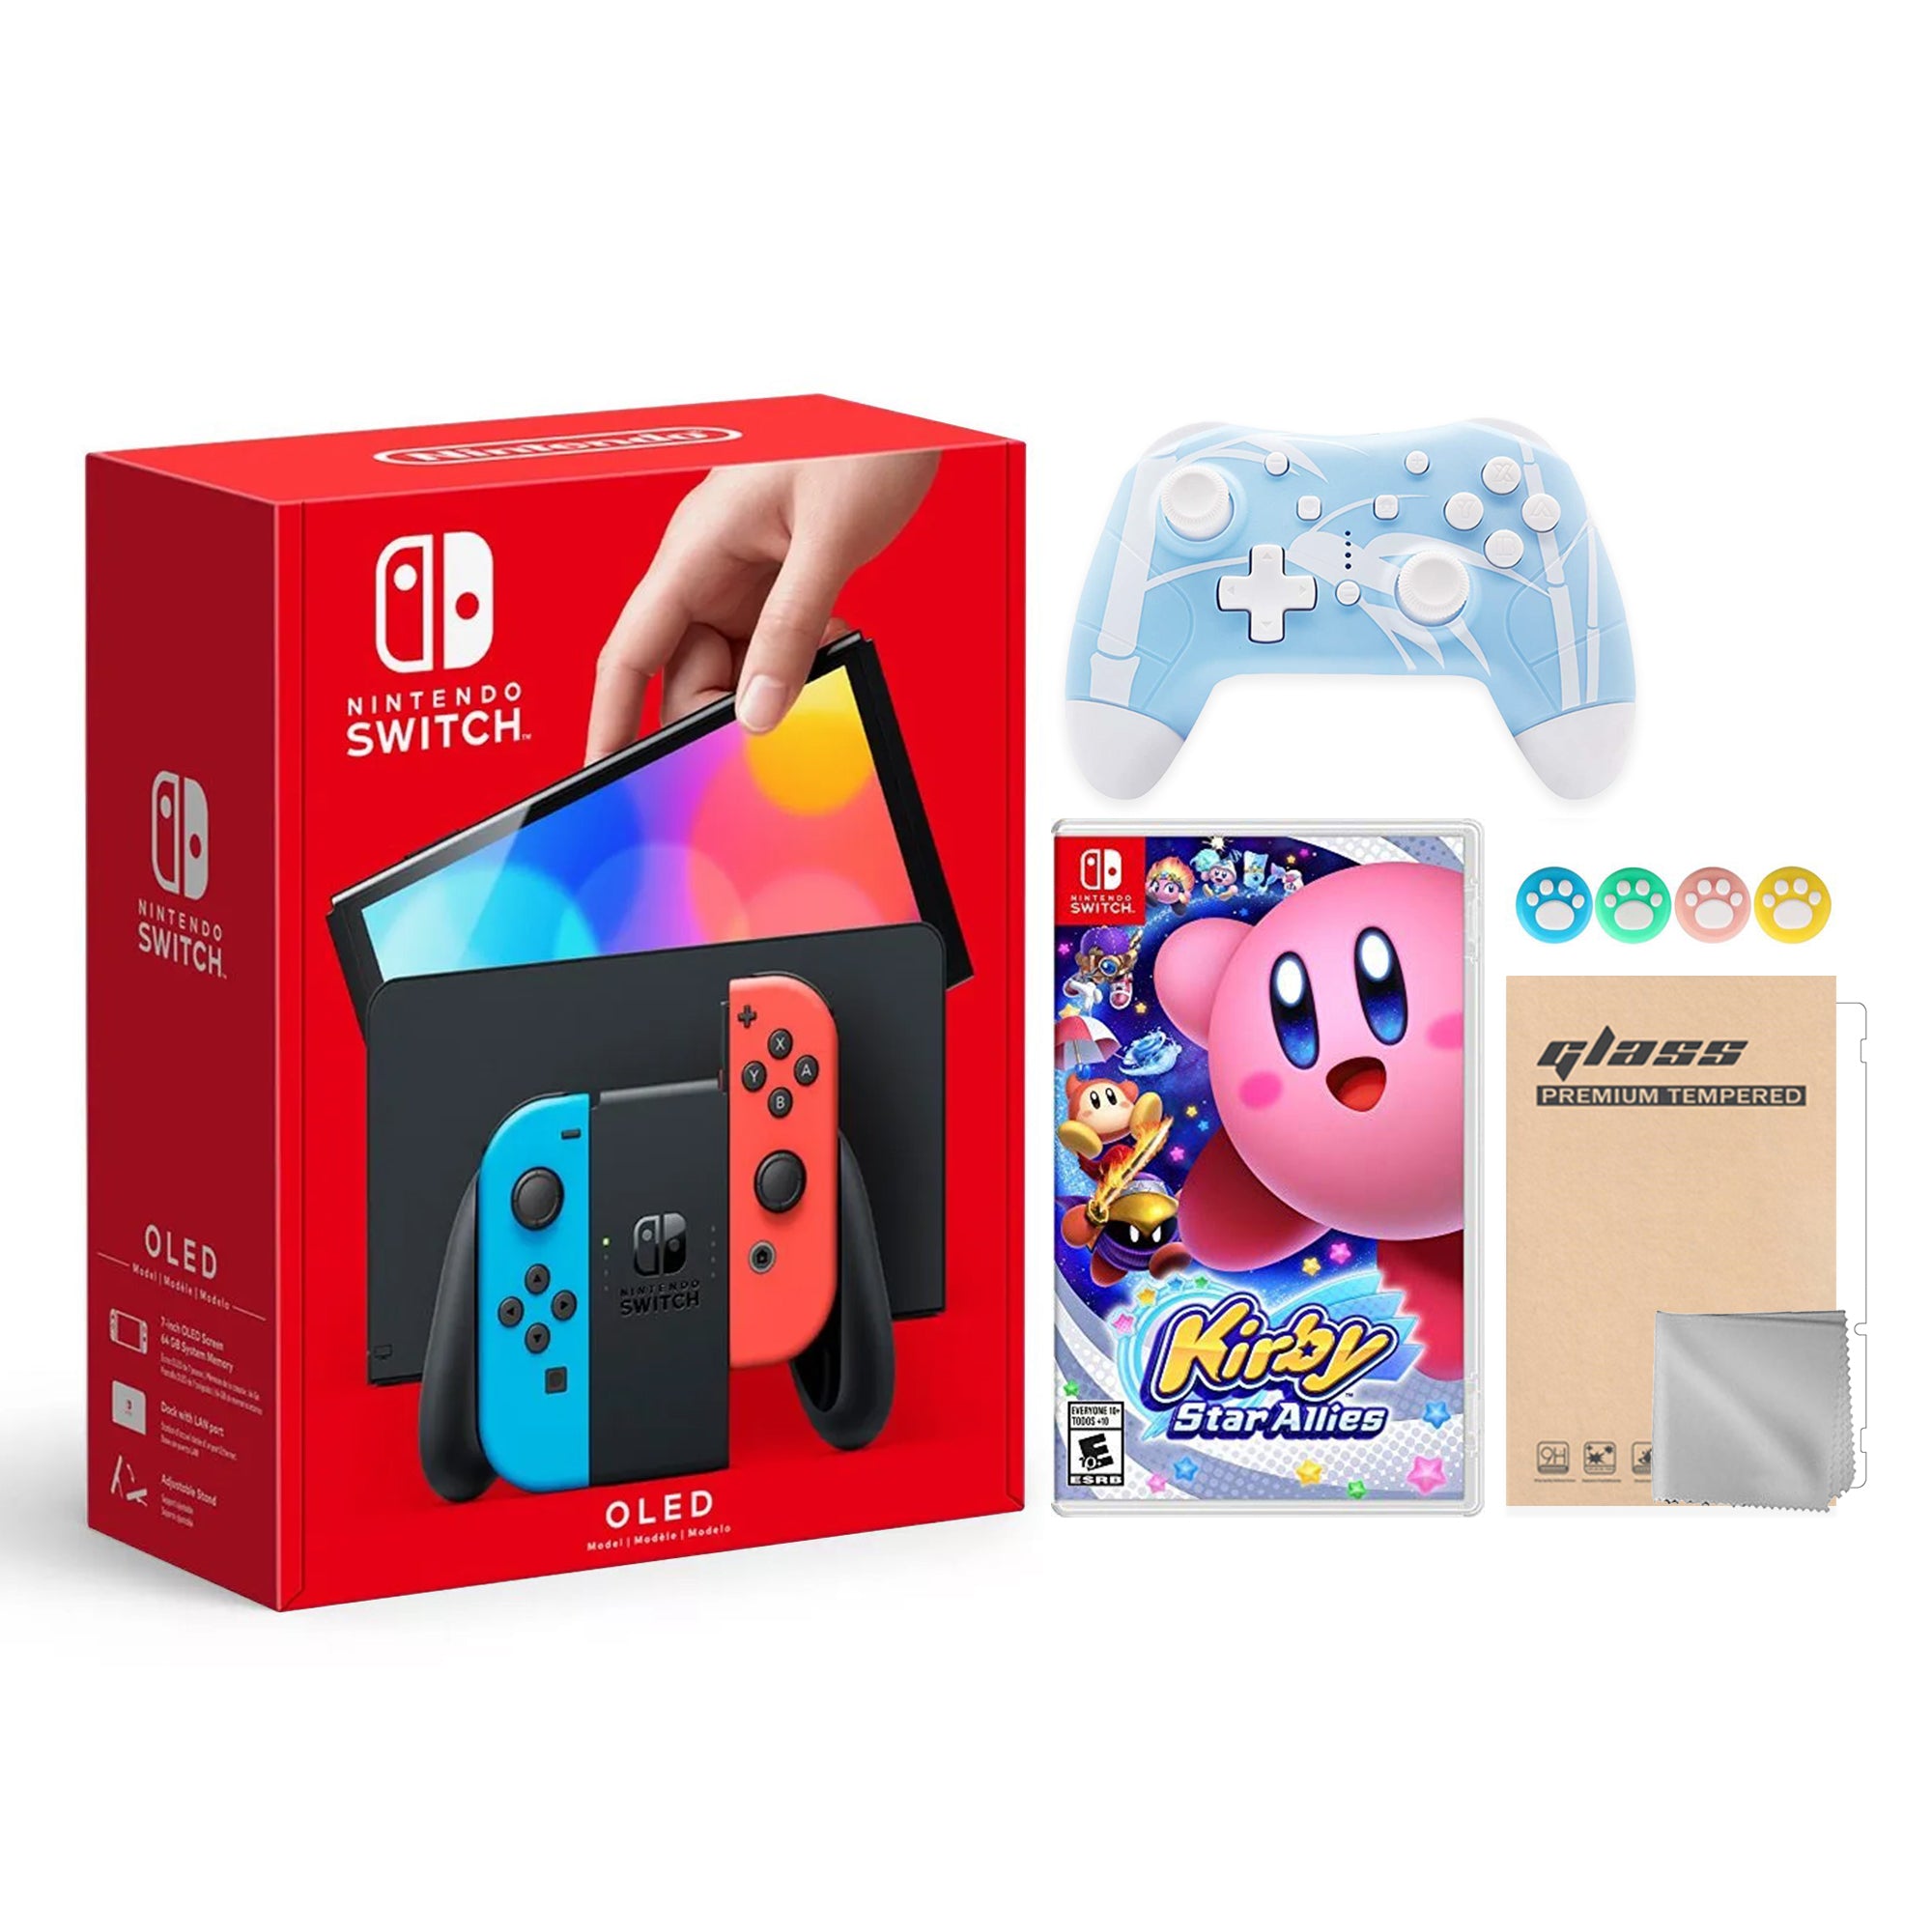 2022 New Nintendo Switch OLED Model Neon Red & Blue Joy Con 64GB Console HD Screen & LAN-Port Dock with Kirby Star Allies, Mytrix Wireless Switch Pro Controller and Accessories